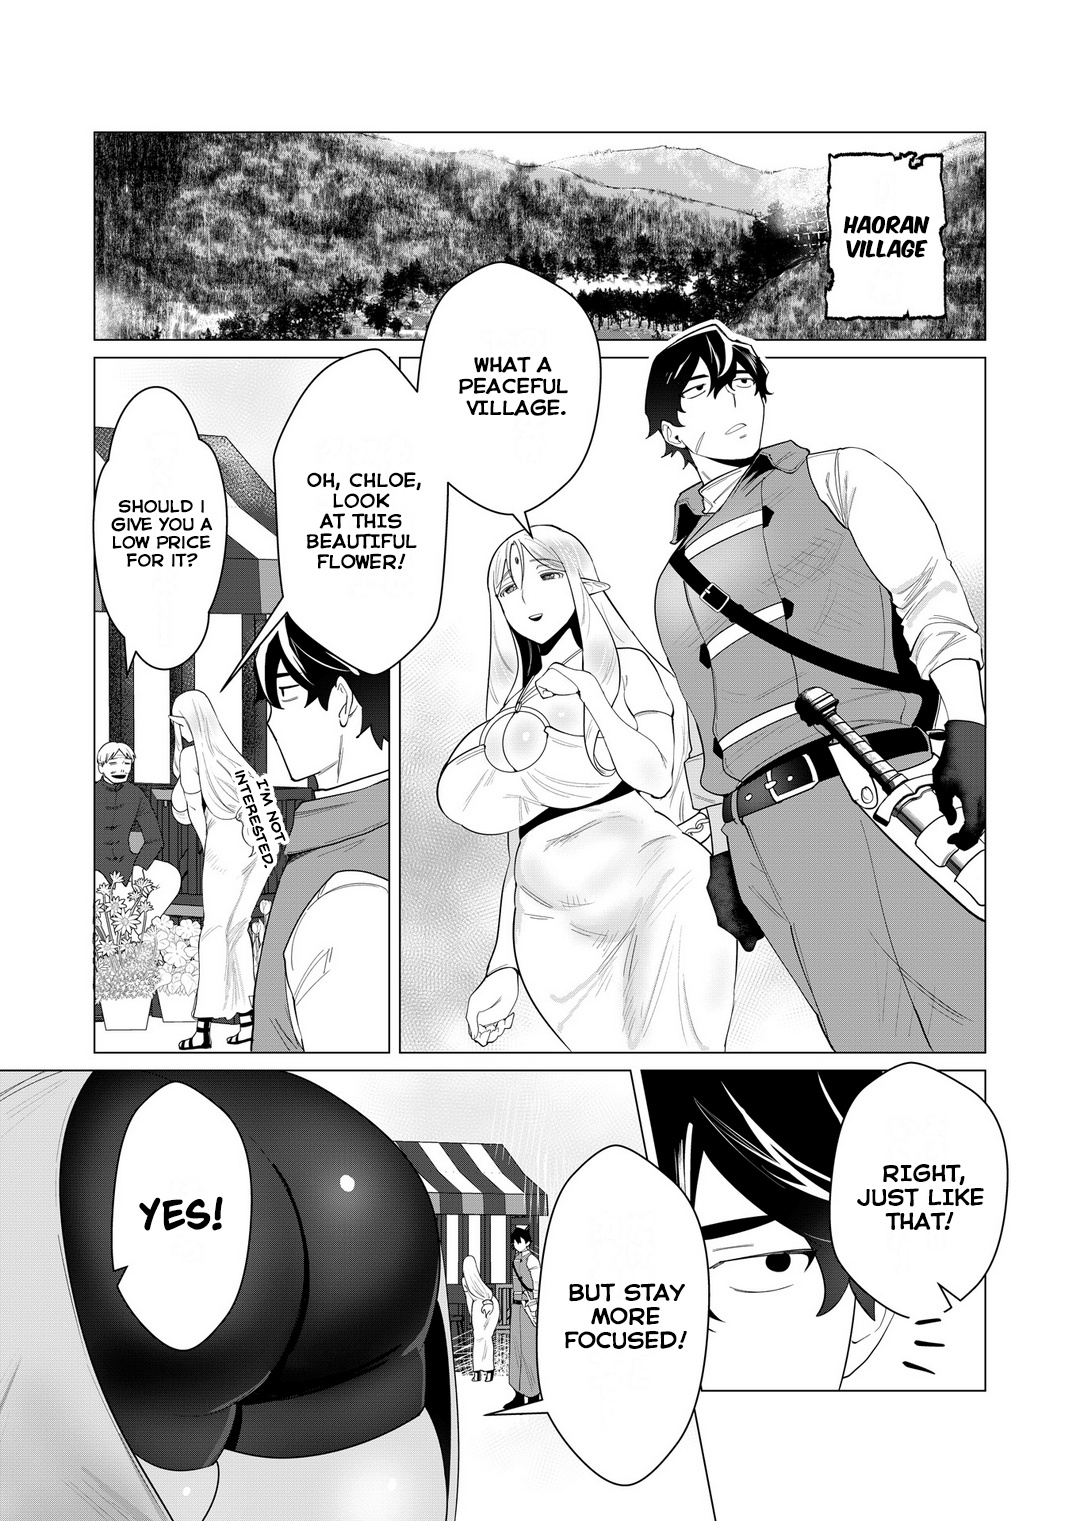 The Hero Wants A Married Woman As A Reward - Page 2